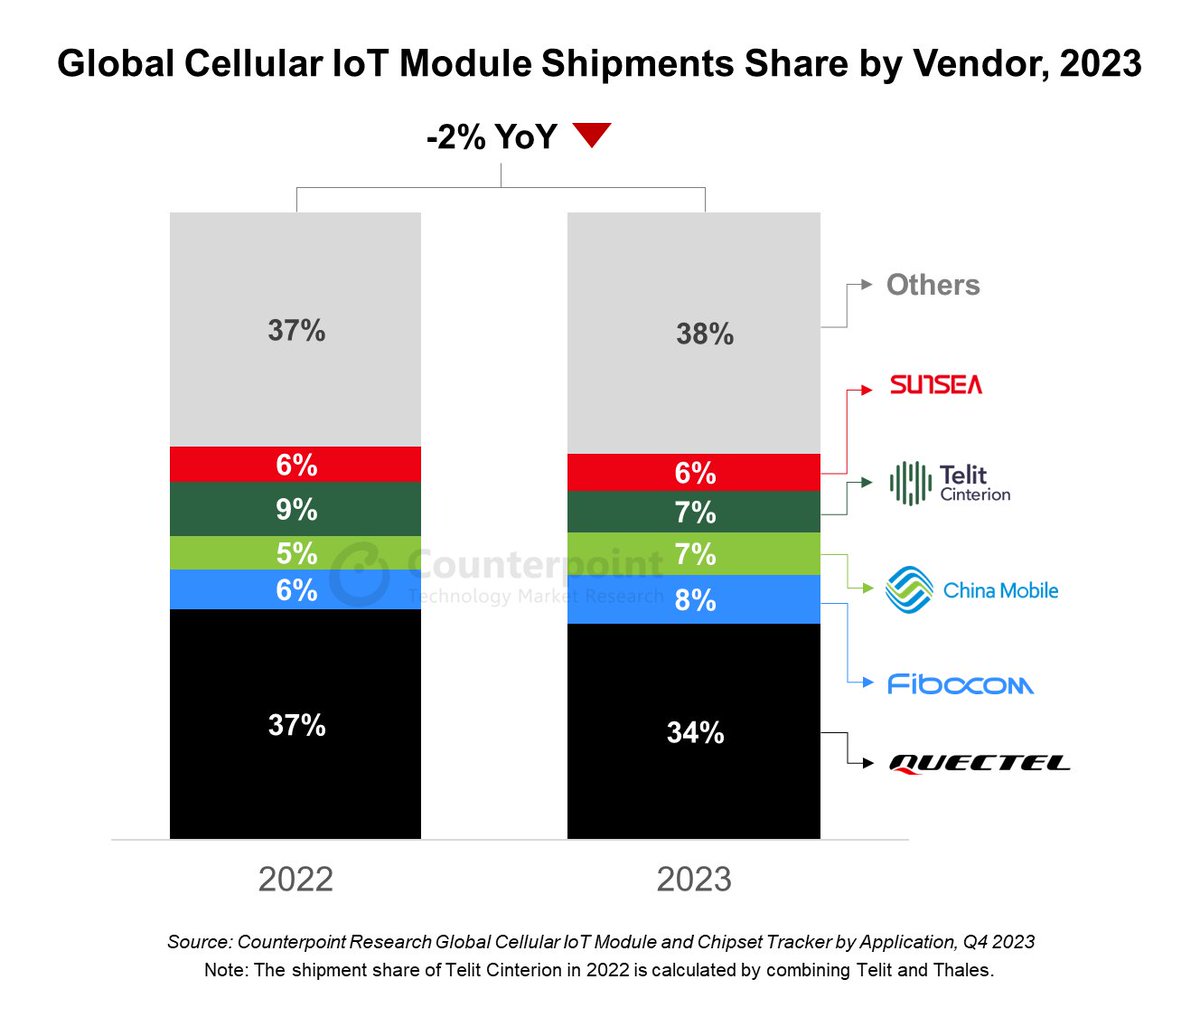 Just published: Global Cellular IoT Module Shipments Record First-ever Annual Decline: counterpointresearch.com/insights/cellu… Key takeaways: - The global cellular IoT module market’s shipments declined 2% in 2023 as compared to 2022. - Despite a decline in shipments, @Quectel_IoT